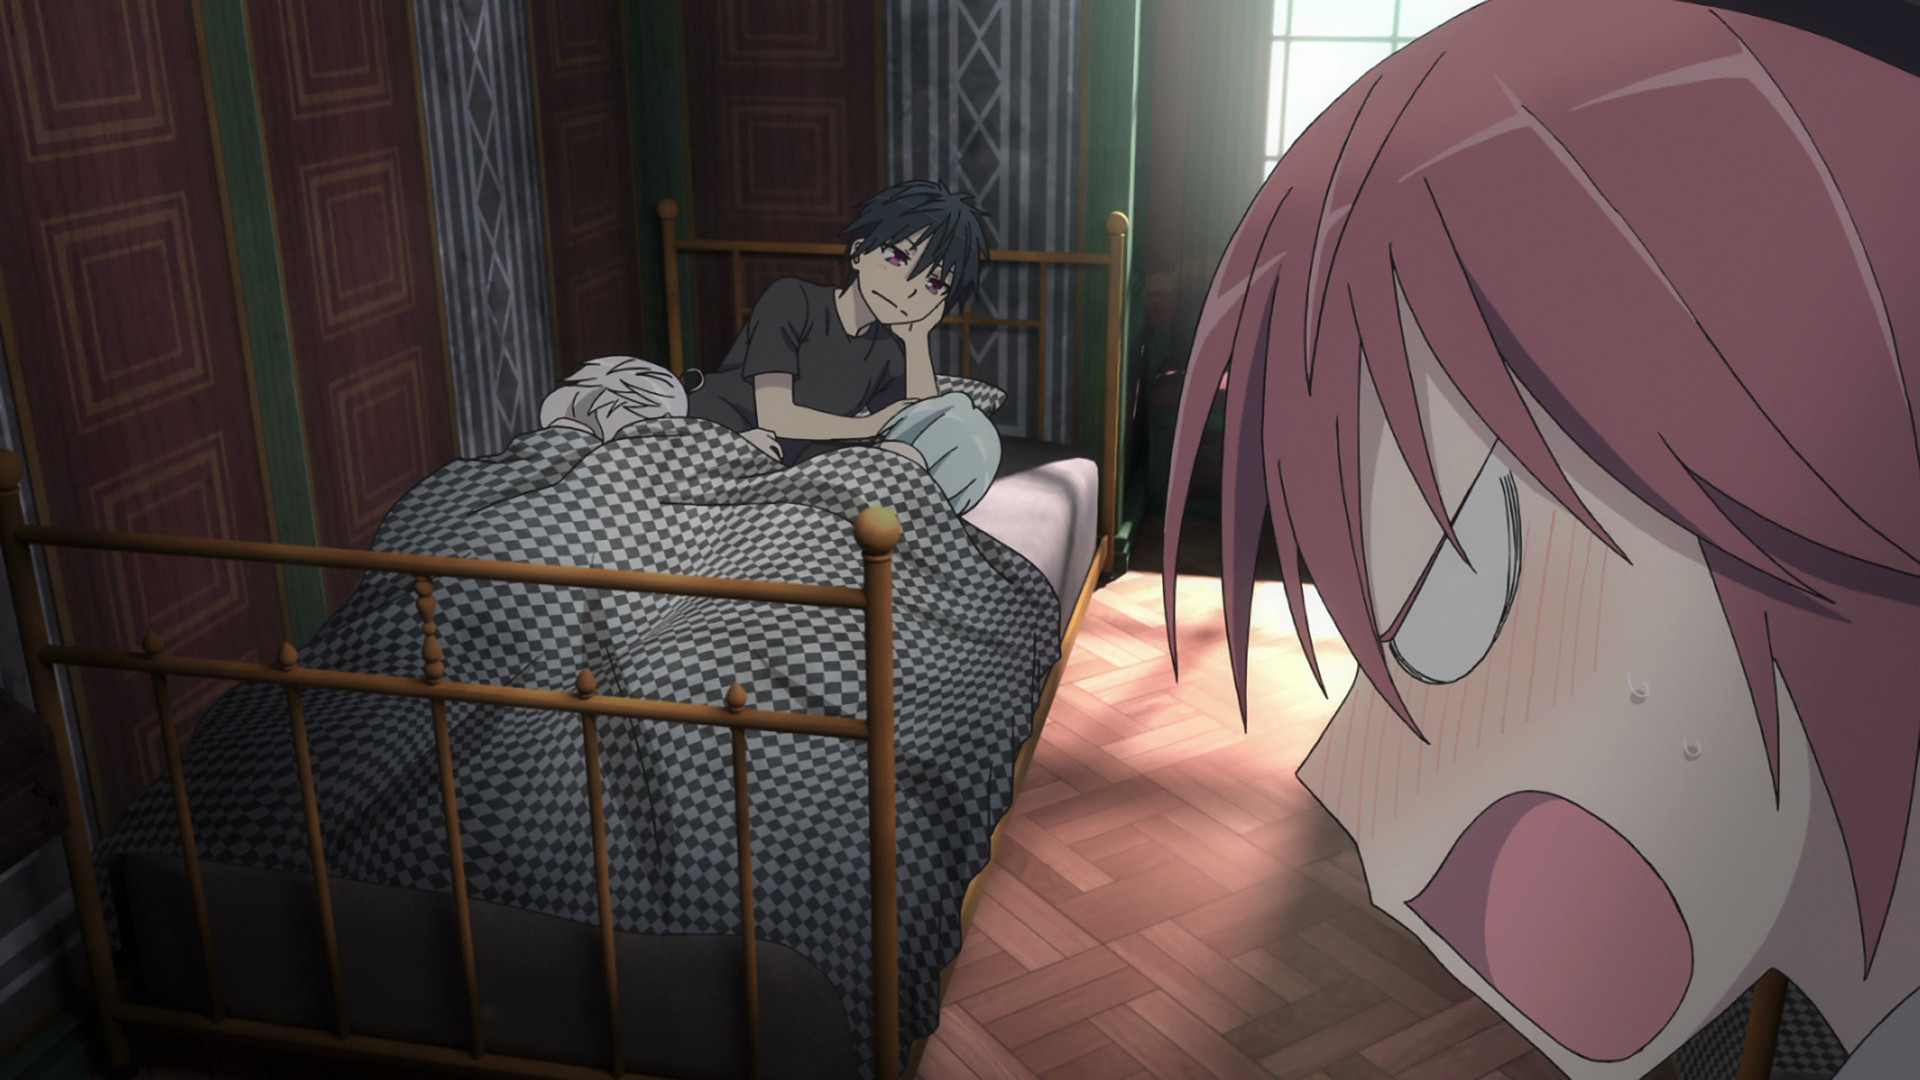 1920x1080 Image - Yui Arata Arin Lilith bed ep5 AN.png | Trinity Seven Wiki | FANDOM  powered by Wikia